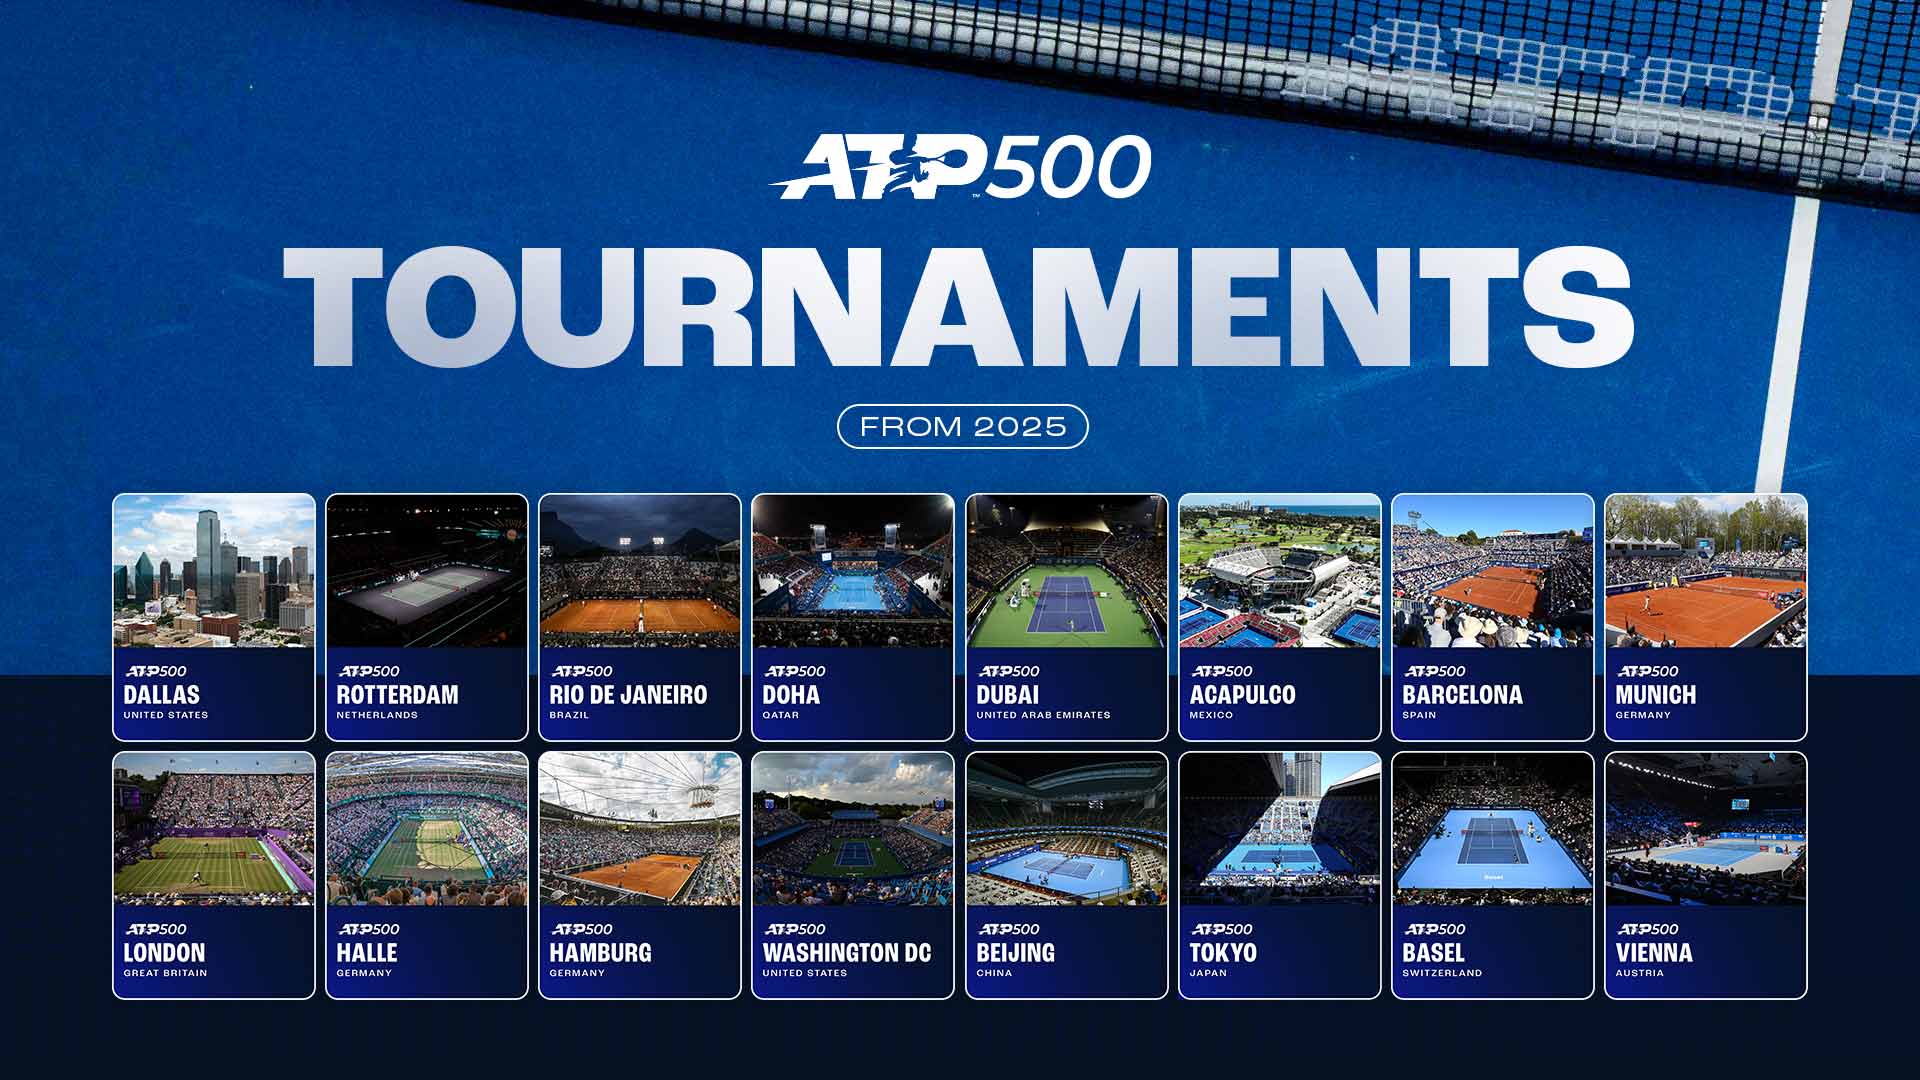 atp-500-tournaments-from-2025-graphic.jpg